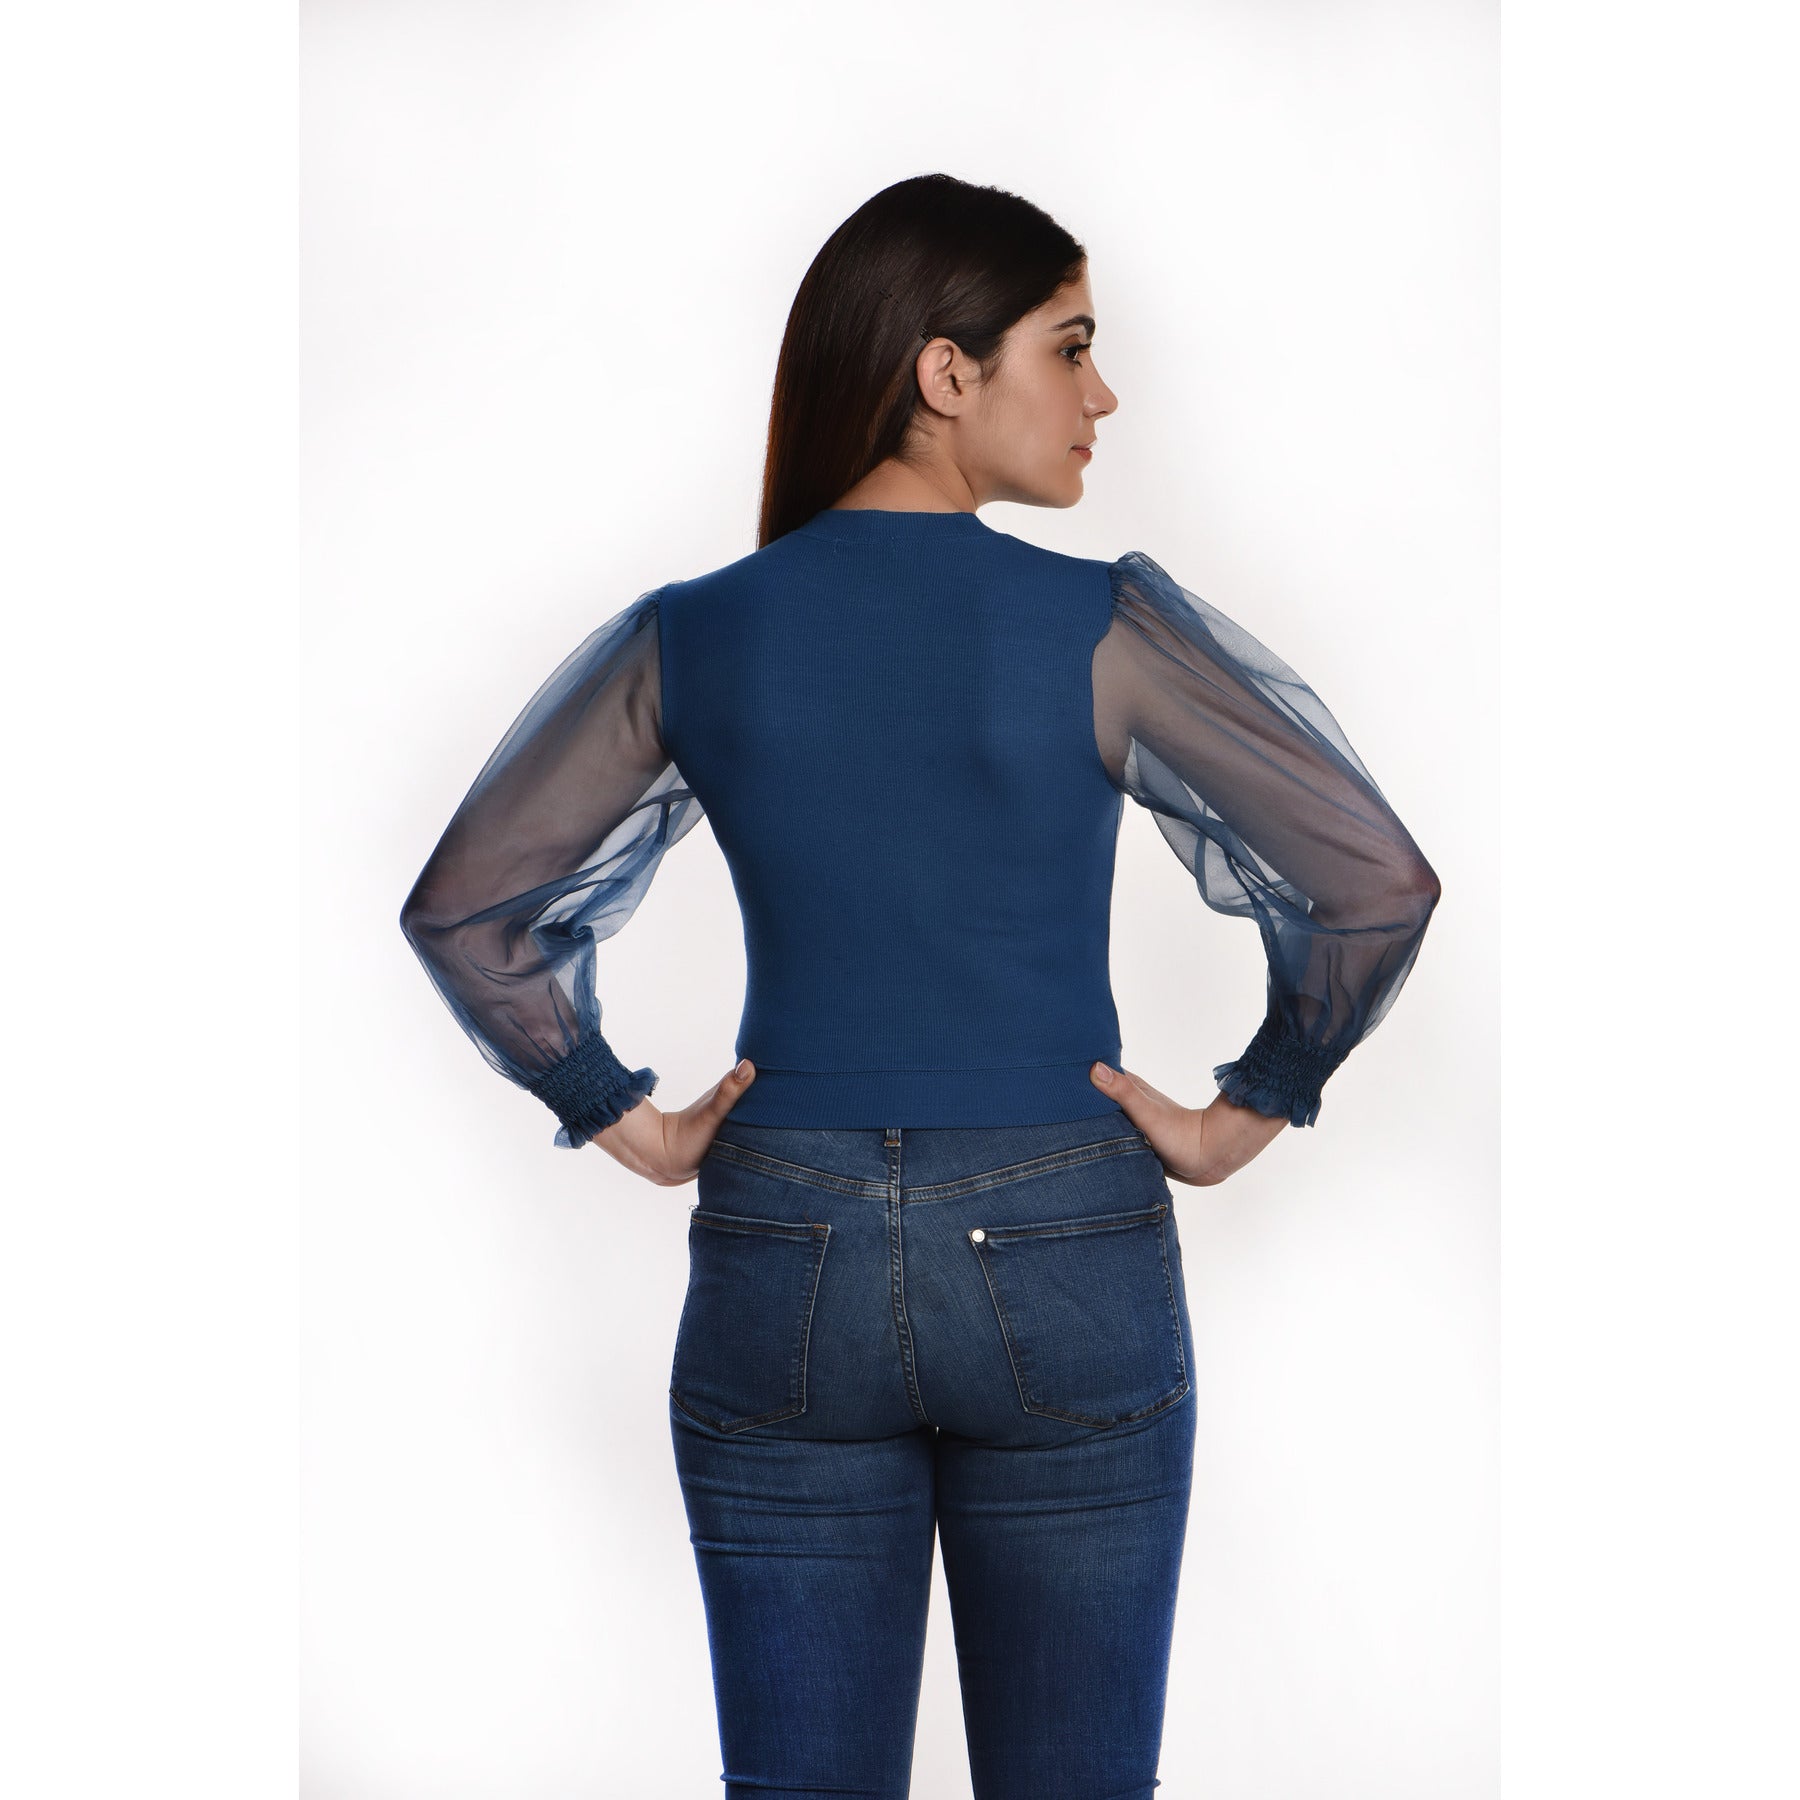 Hosiery Blouses with Puffy Organza Full Sleeves - Azure Blue - Blouse featured